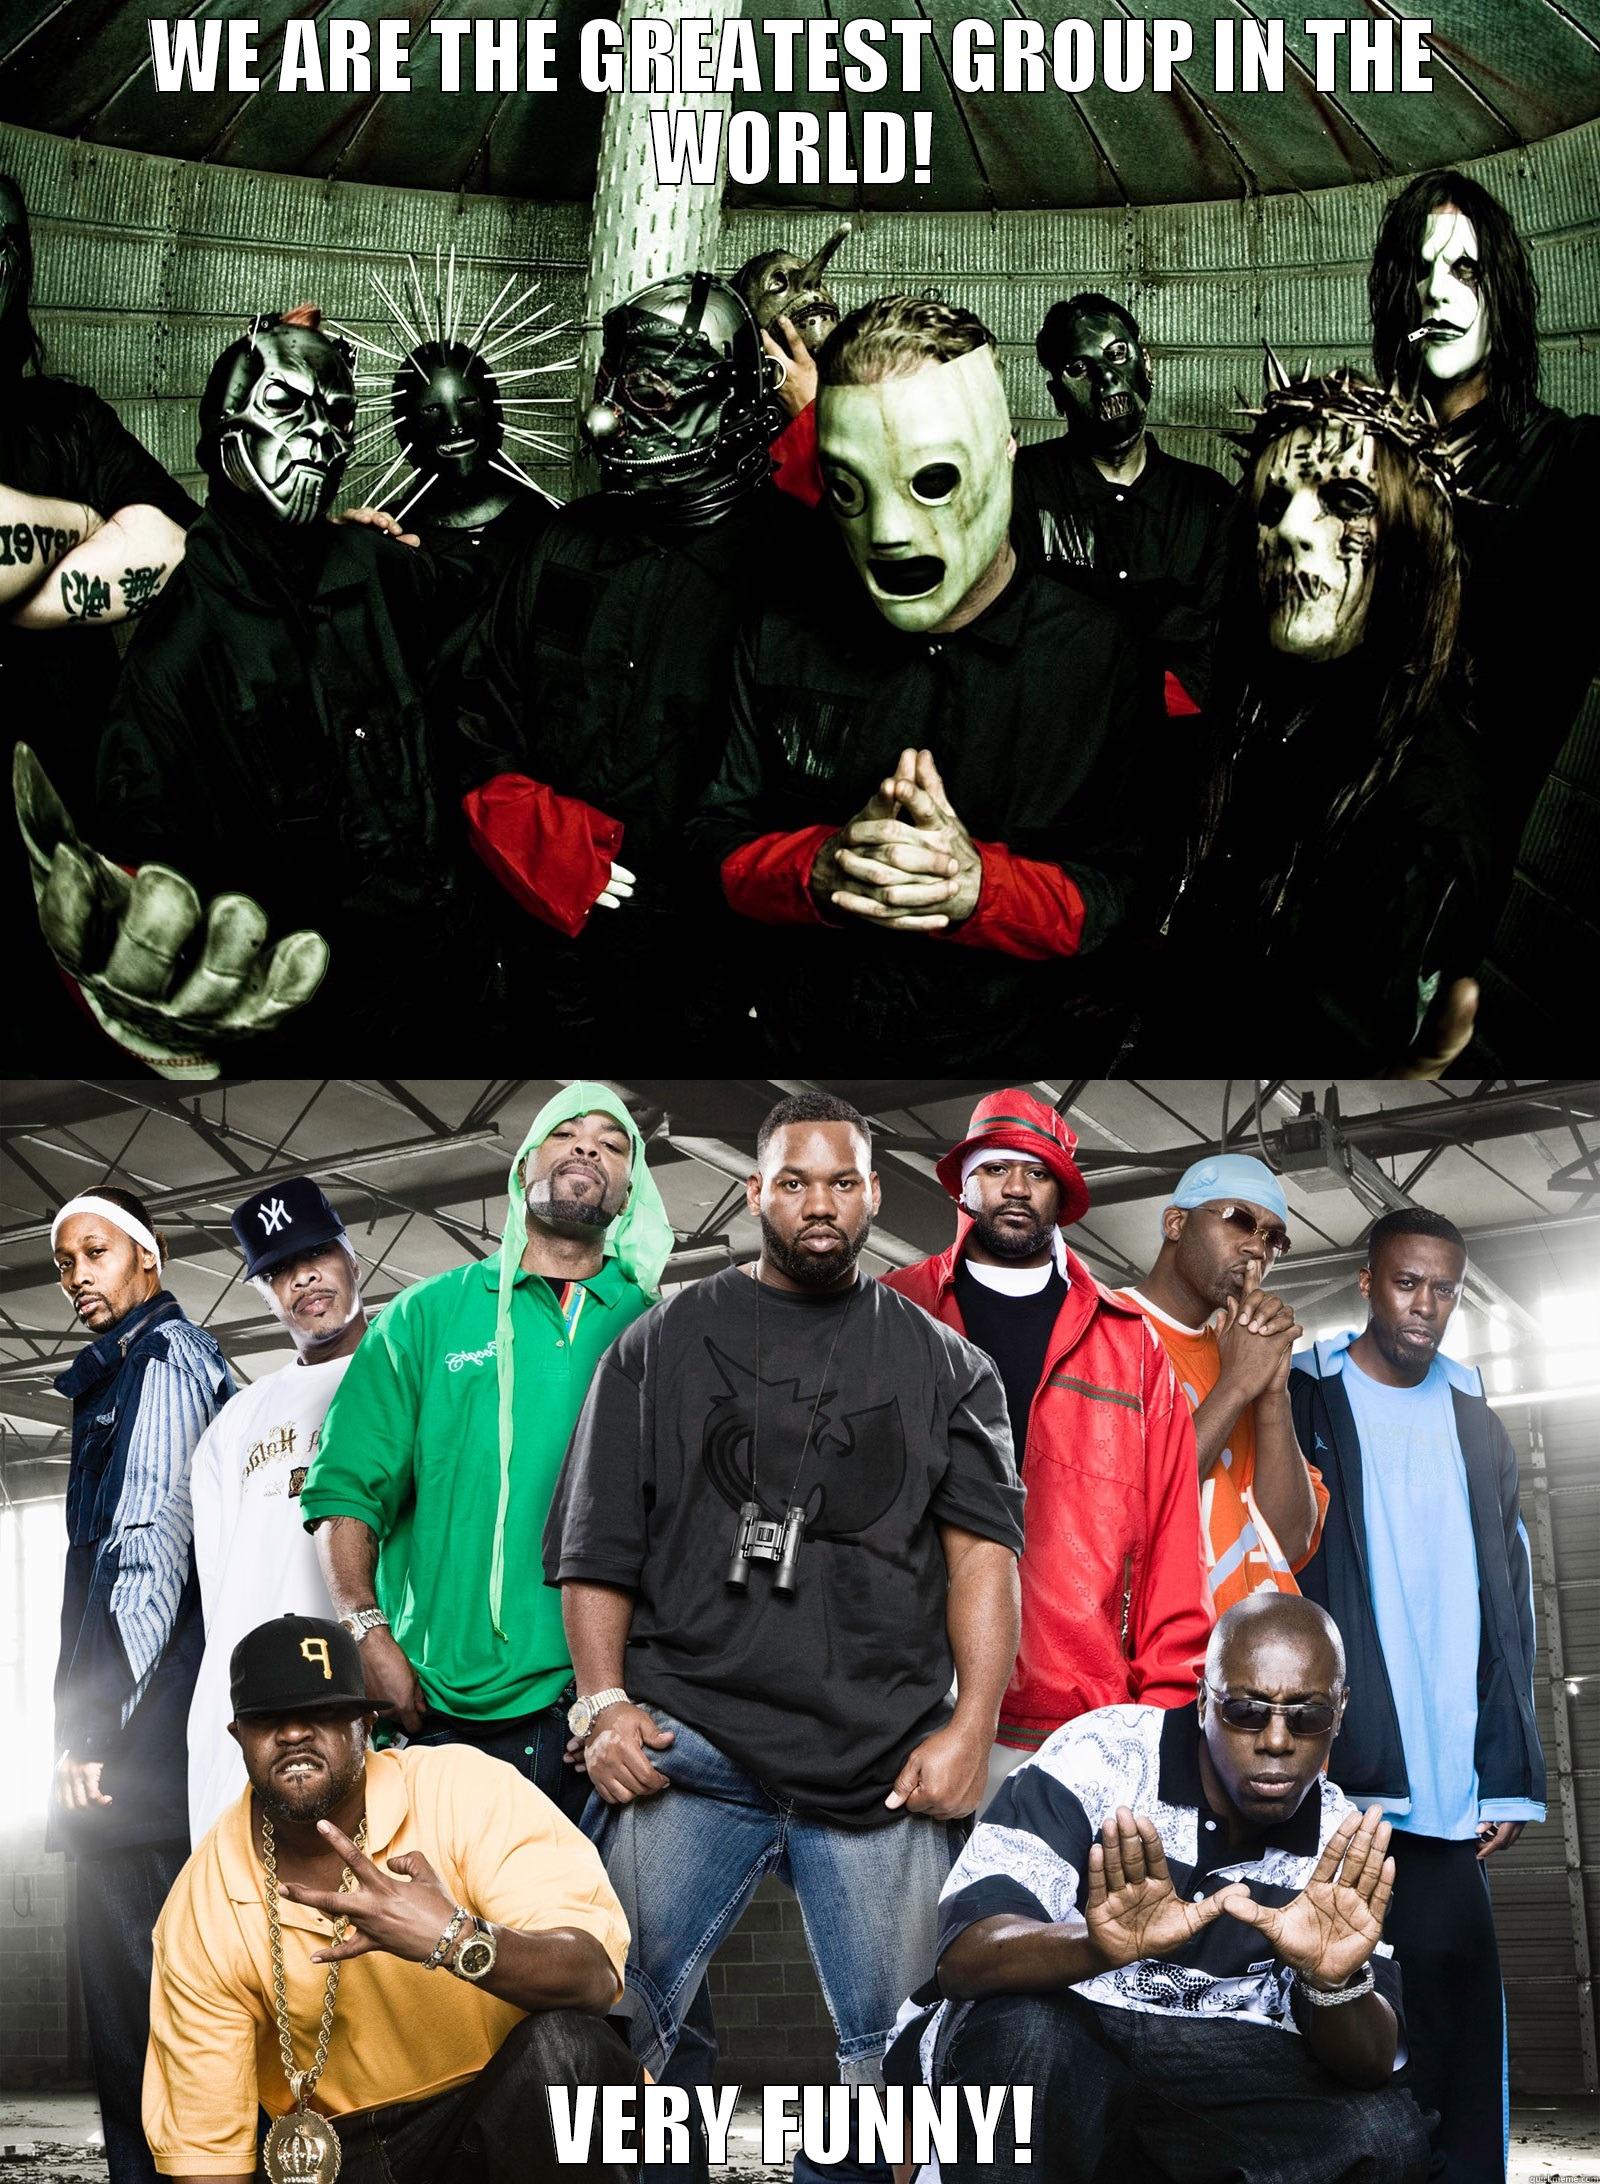 Slipknot and Wu-Tang Clan - WE ARE THE GREATEST GROUP IN THE WORLD! VERY FUNNY! Misc